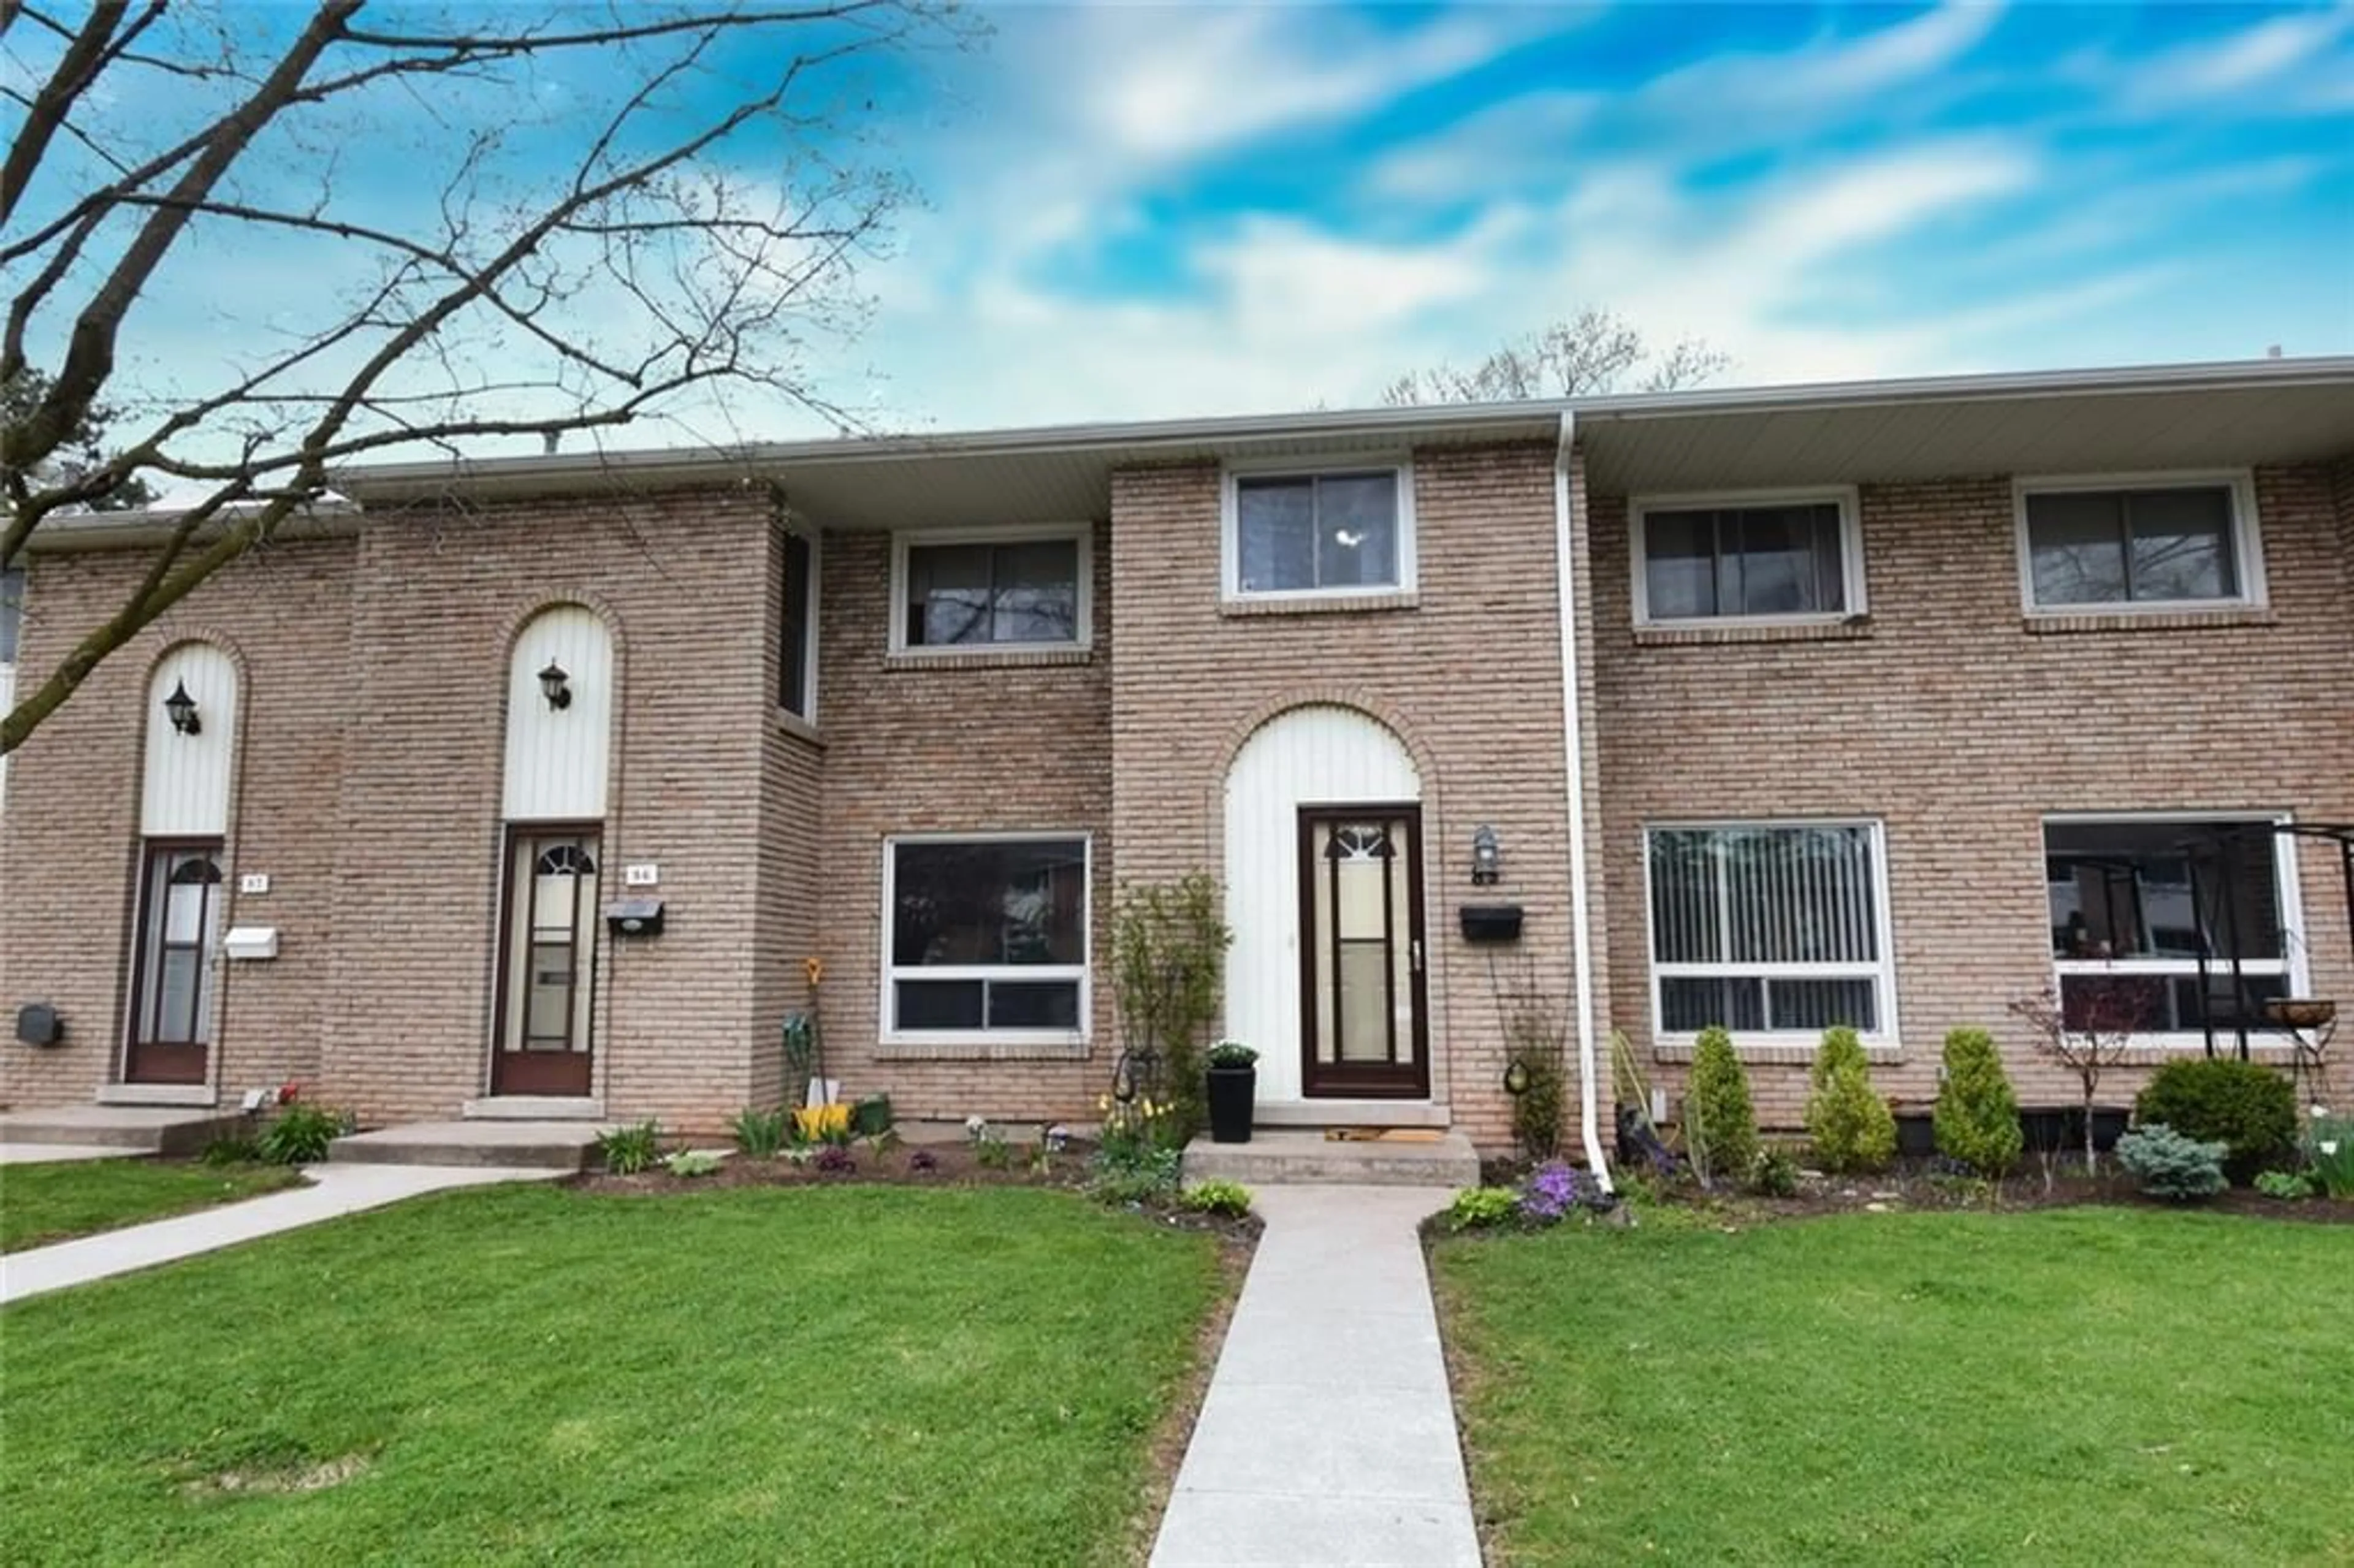 Home with brick exterior material for 151 GATESHEAD Cres #85, Stoney Creek Ontario L8G 3W1